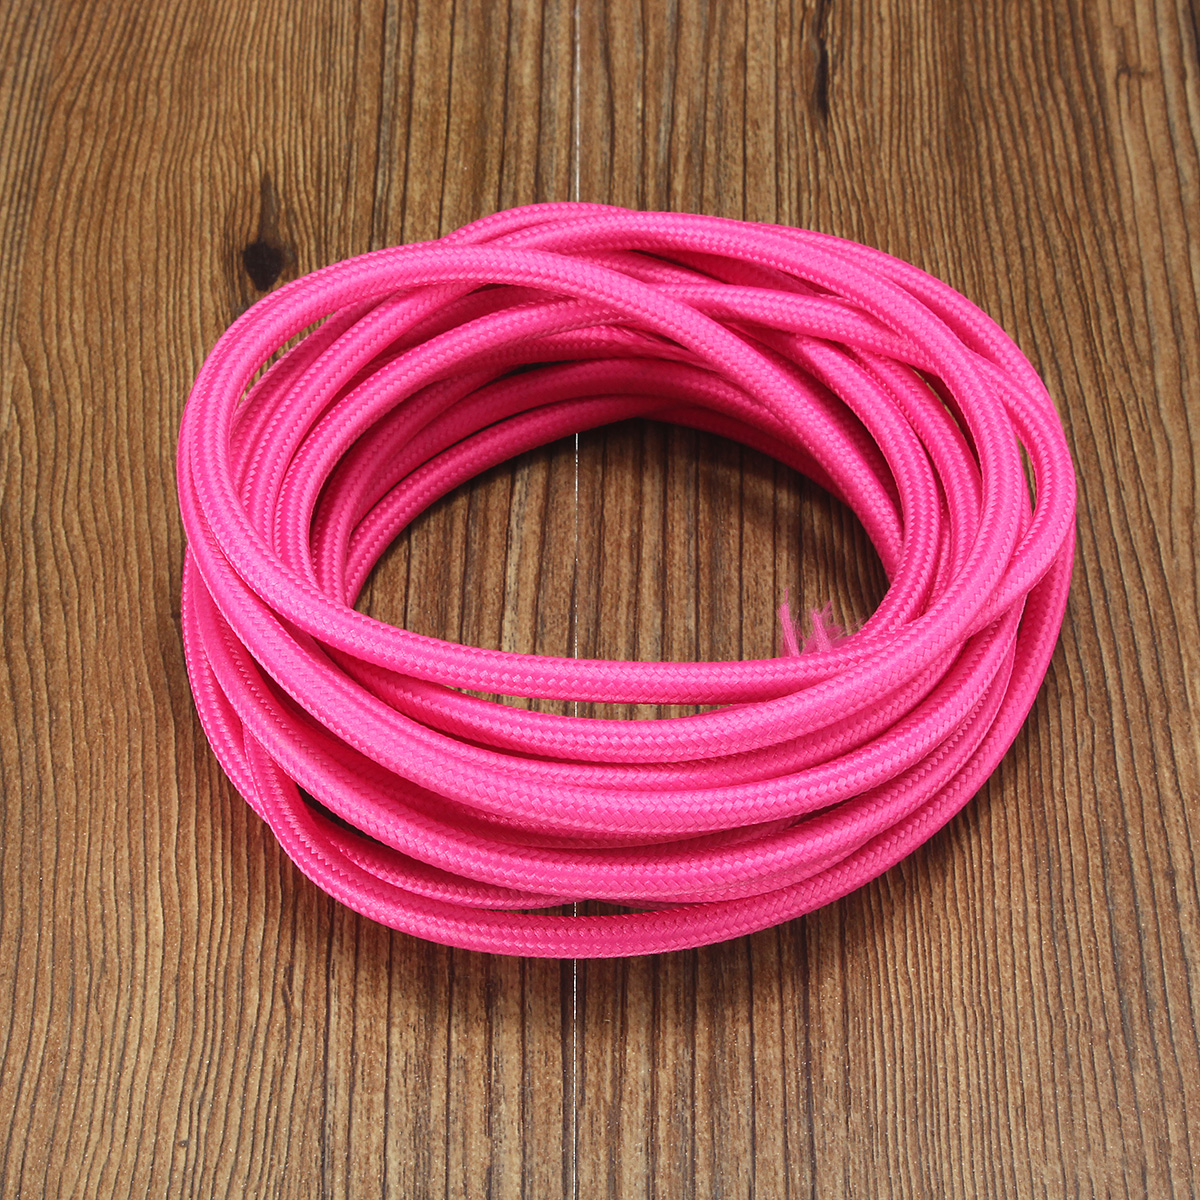 5M-2-Cord-Color-Vintage-Twist-Braided-Fabric-Light-Cable-Electric-Wire-1069142-8